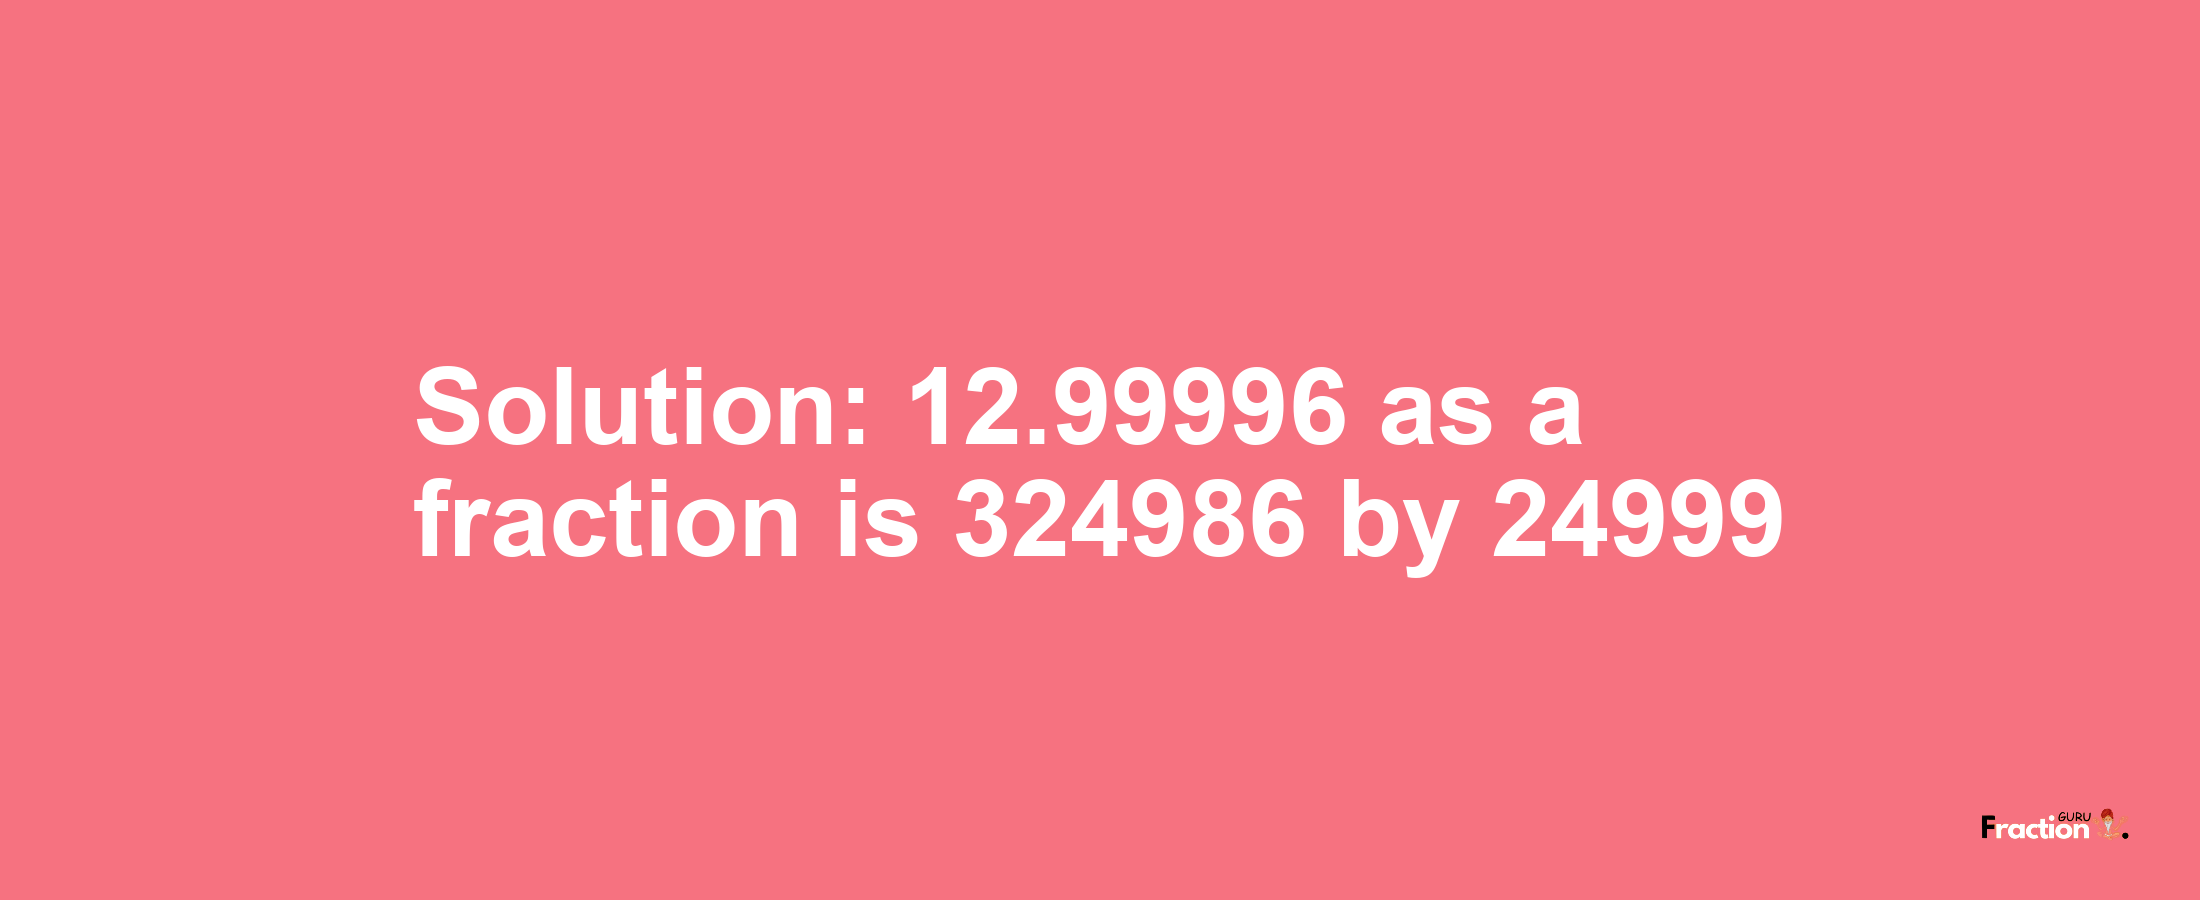 Solution:12.99996 as a fraction is 324986/24999